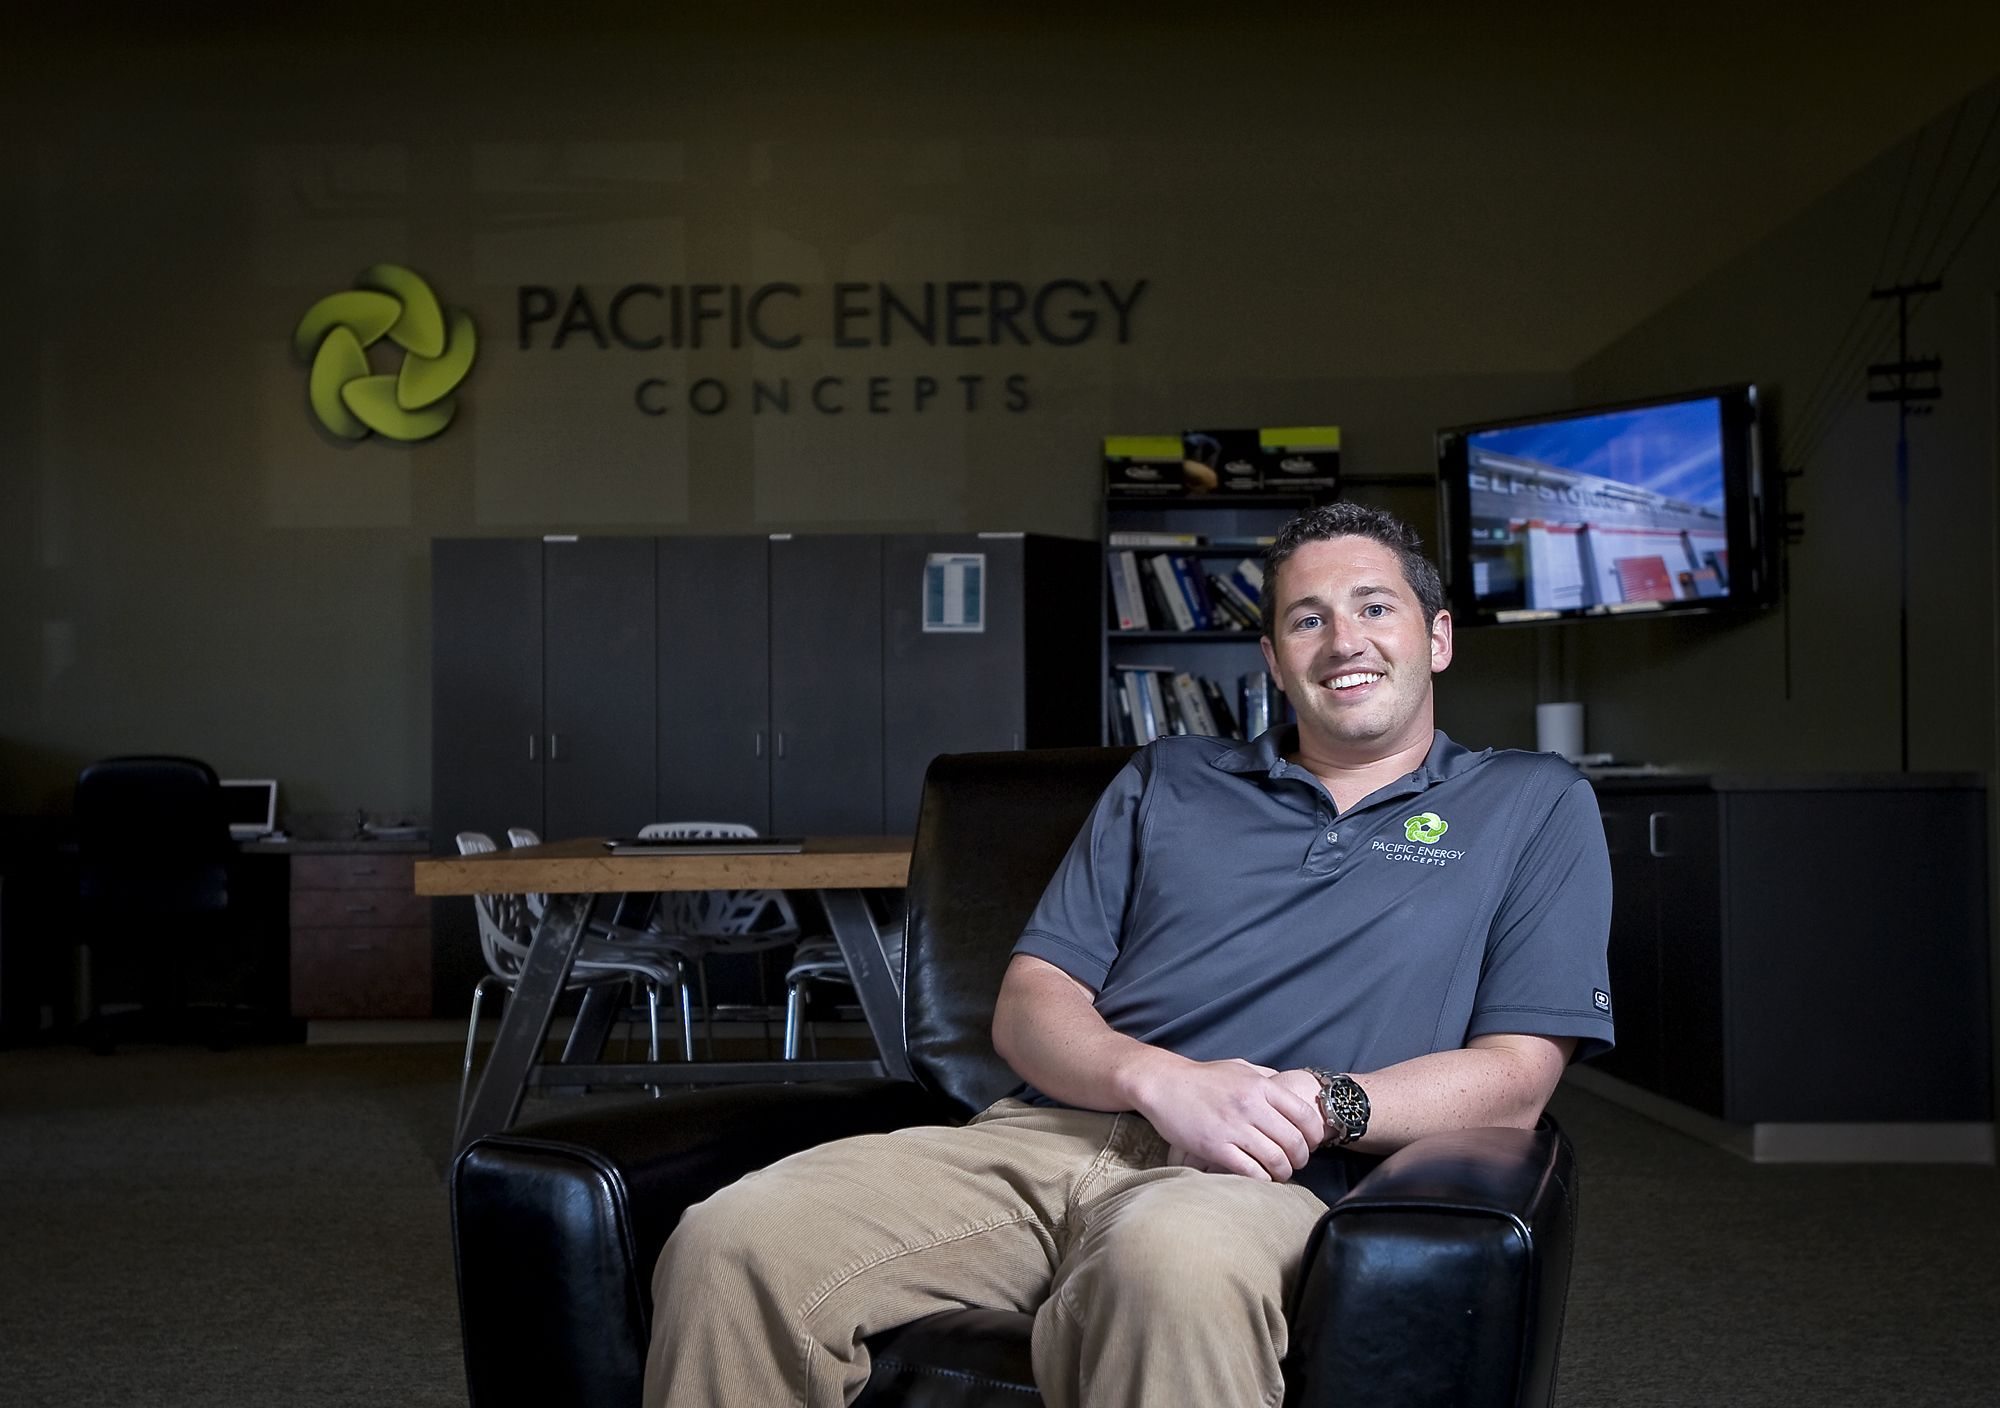 Keith Scott, president and CEO of Pacific Energy Concepts, said he hopes to double his company's annual revenue this year.